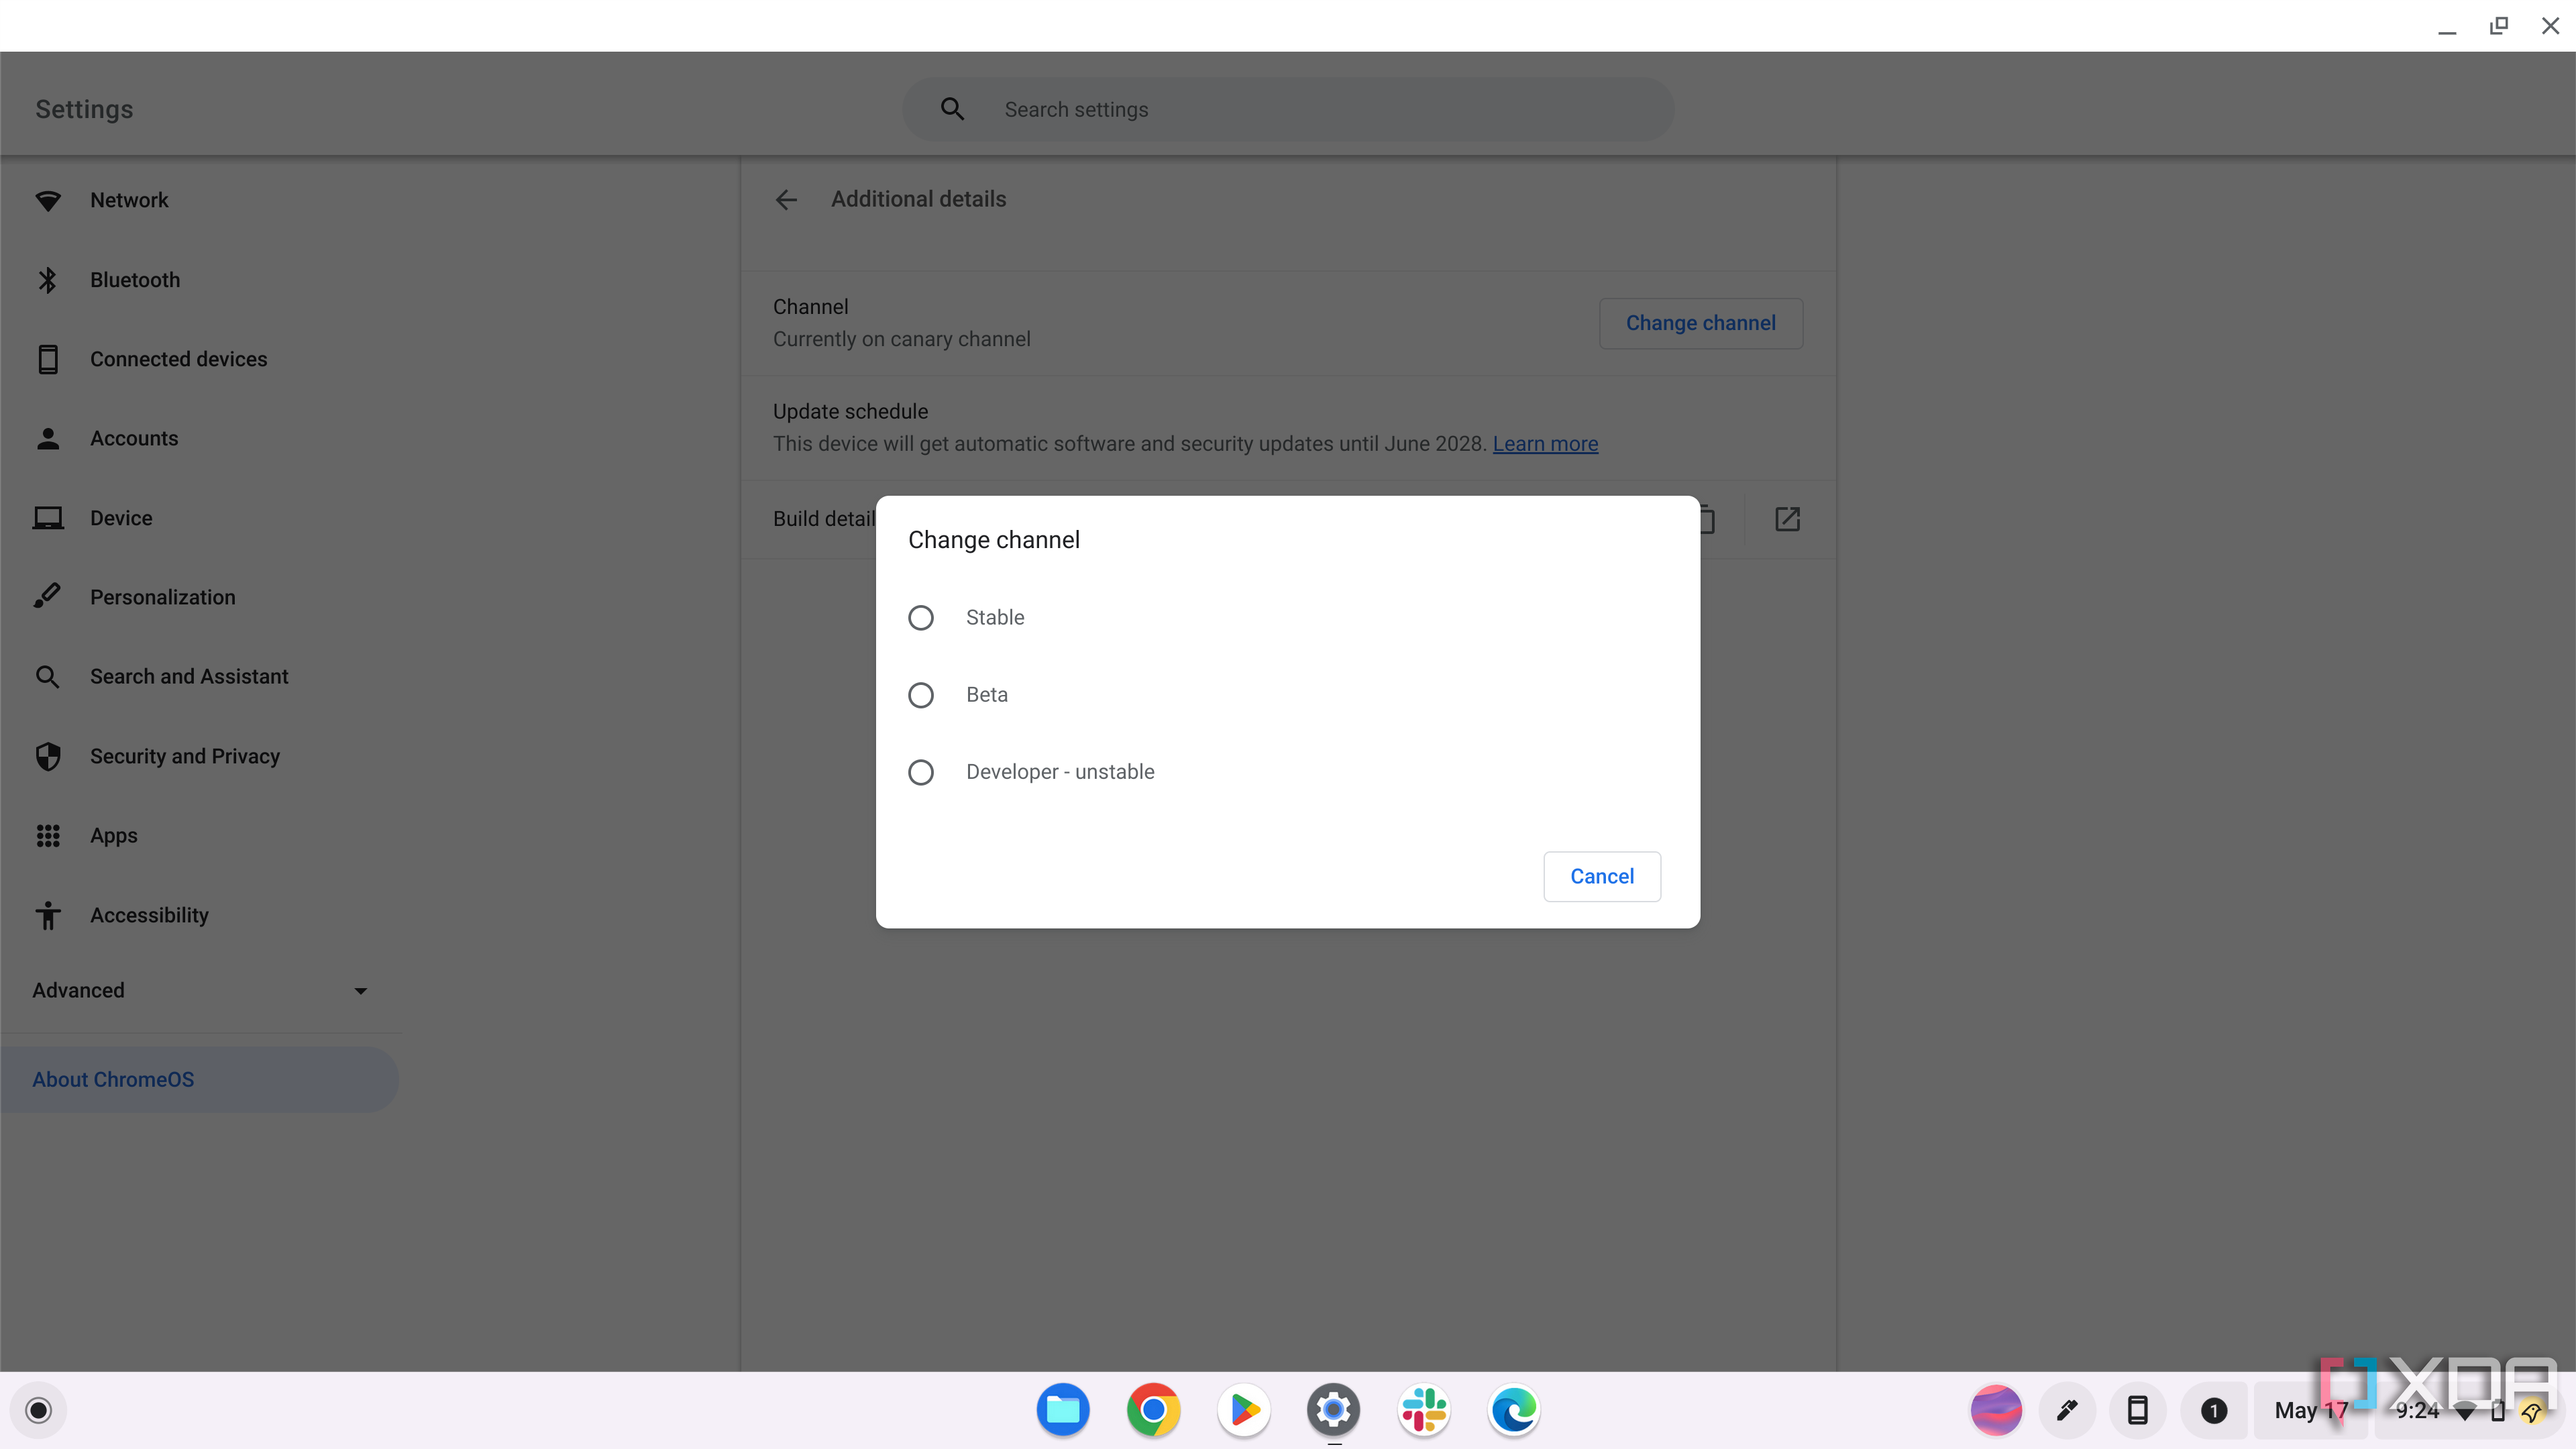 The option to switch channels in ChromeOS